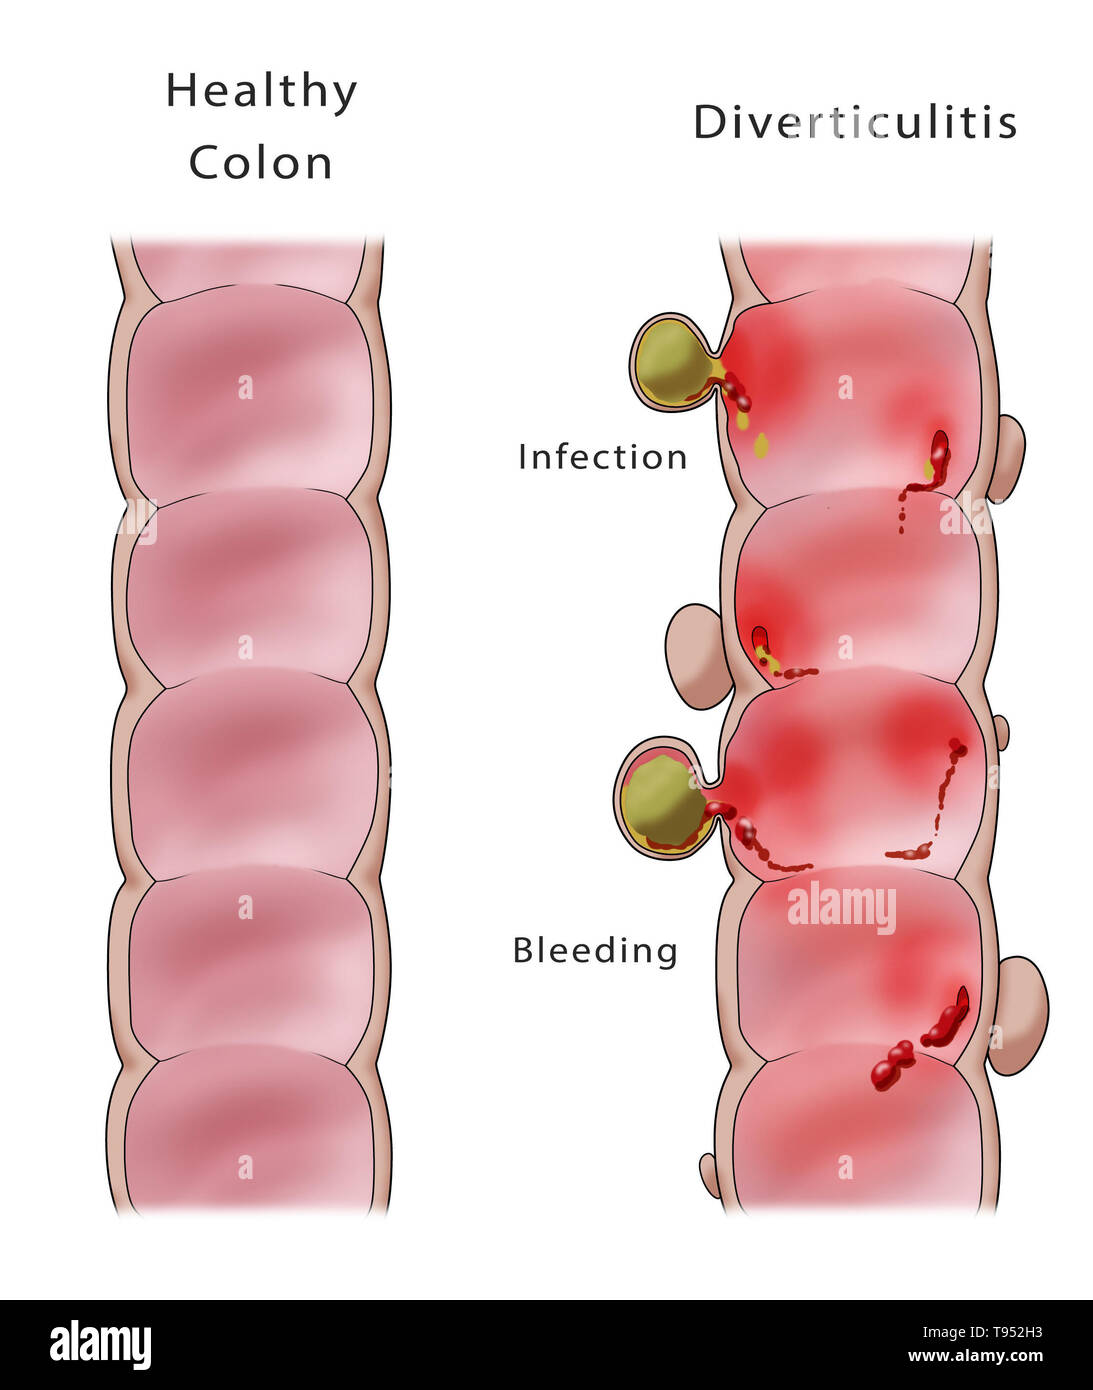 Illustration comparing a healthy colon (left) and a colon with diverticulitis (right). Stock Photo